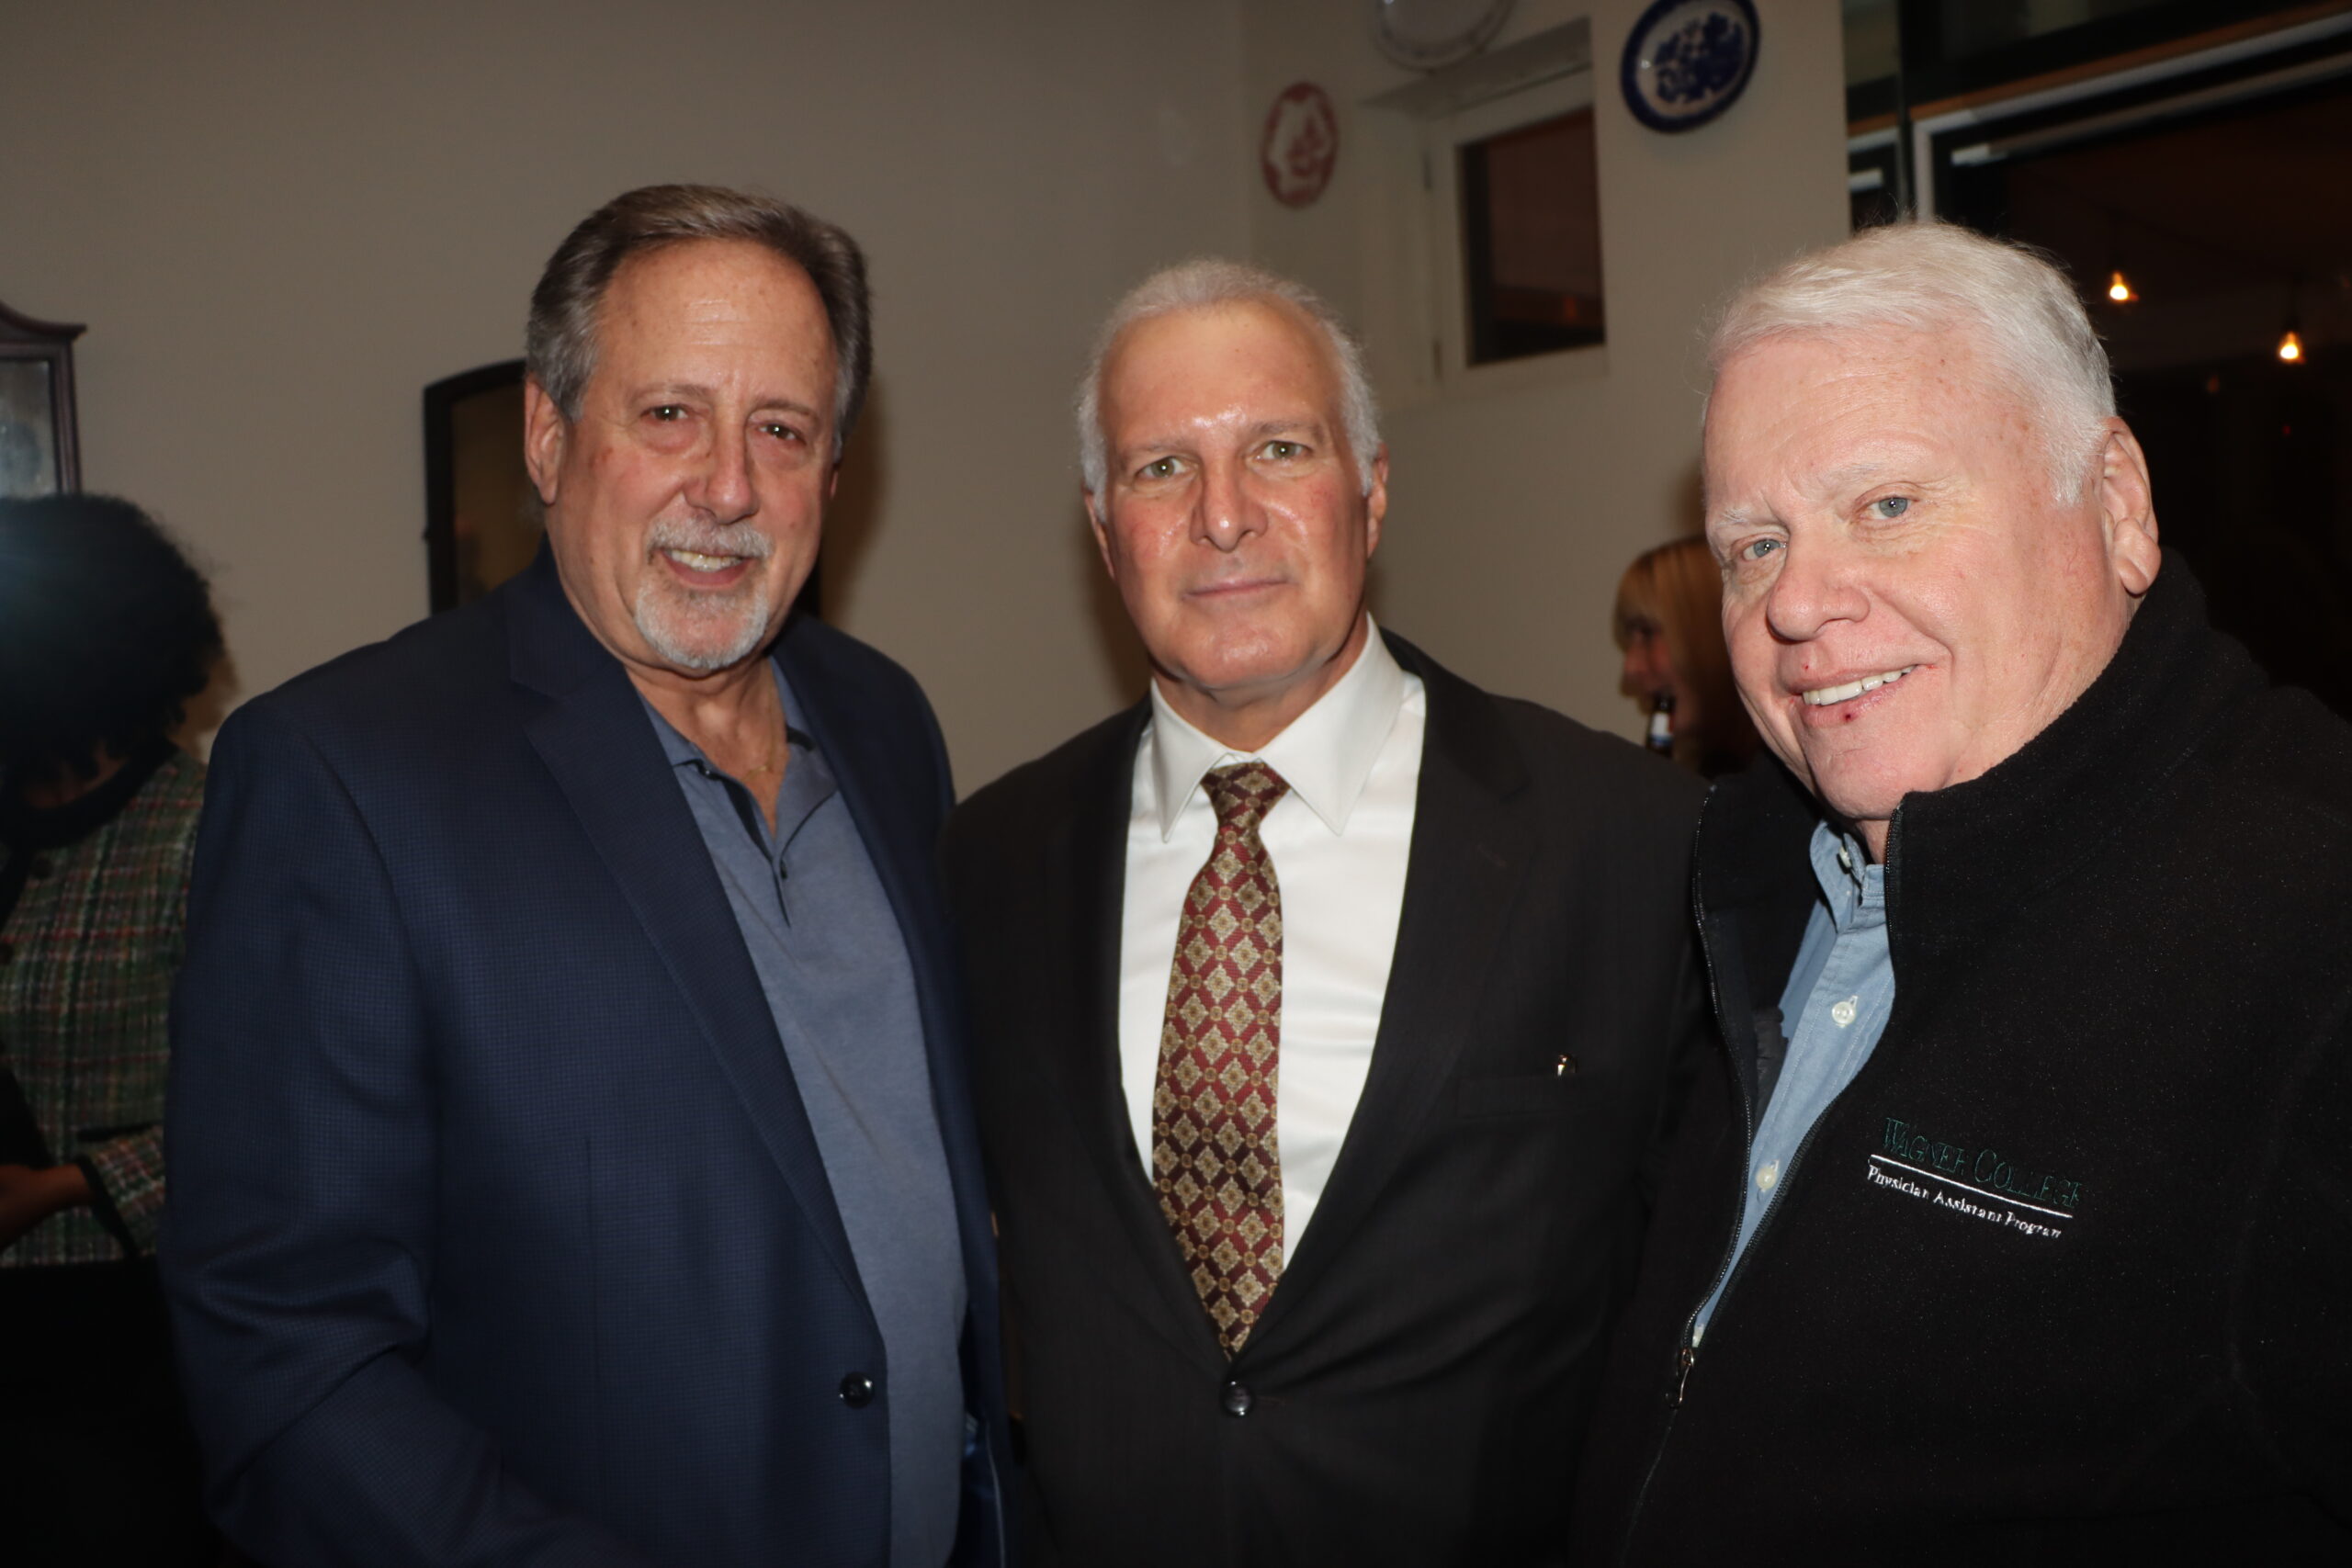 From left: Justice Donald Kurtz, Gregory Cerchione, and Dennis Quirk at Kurtz’s retirement party.